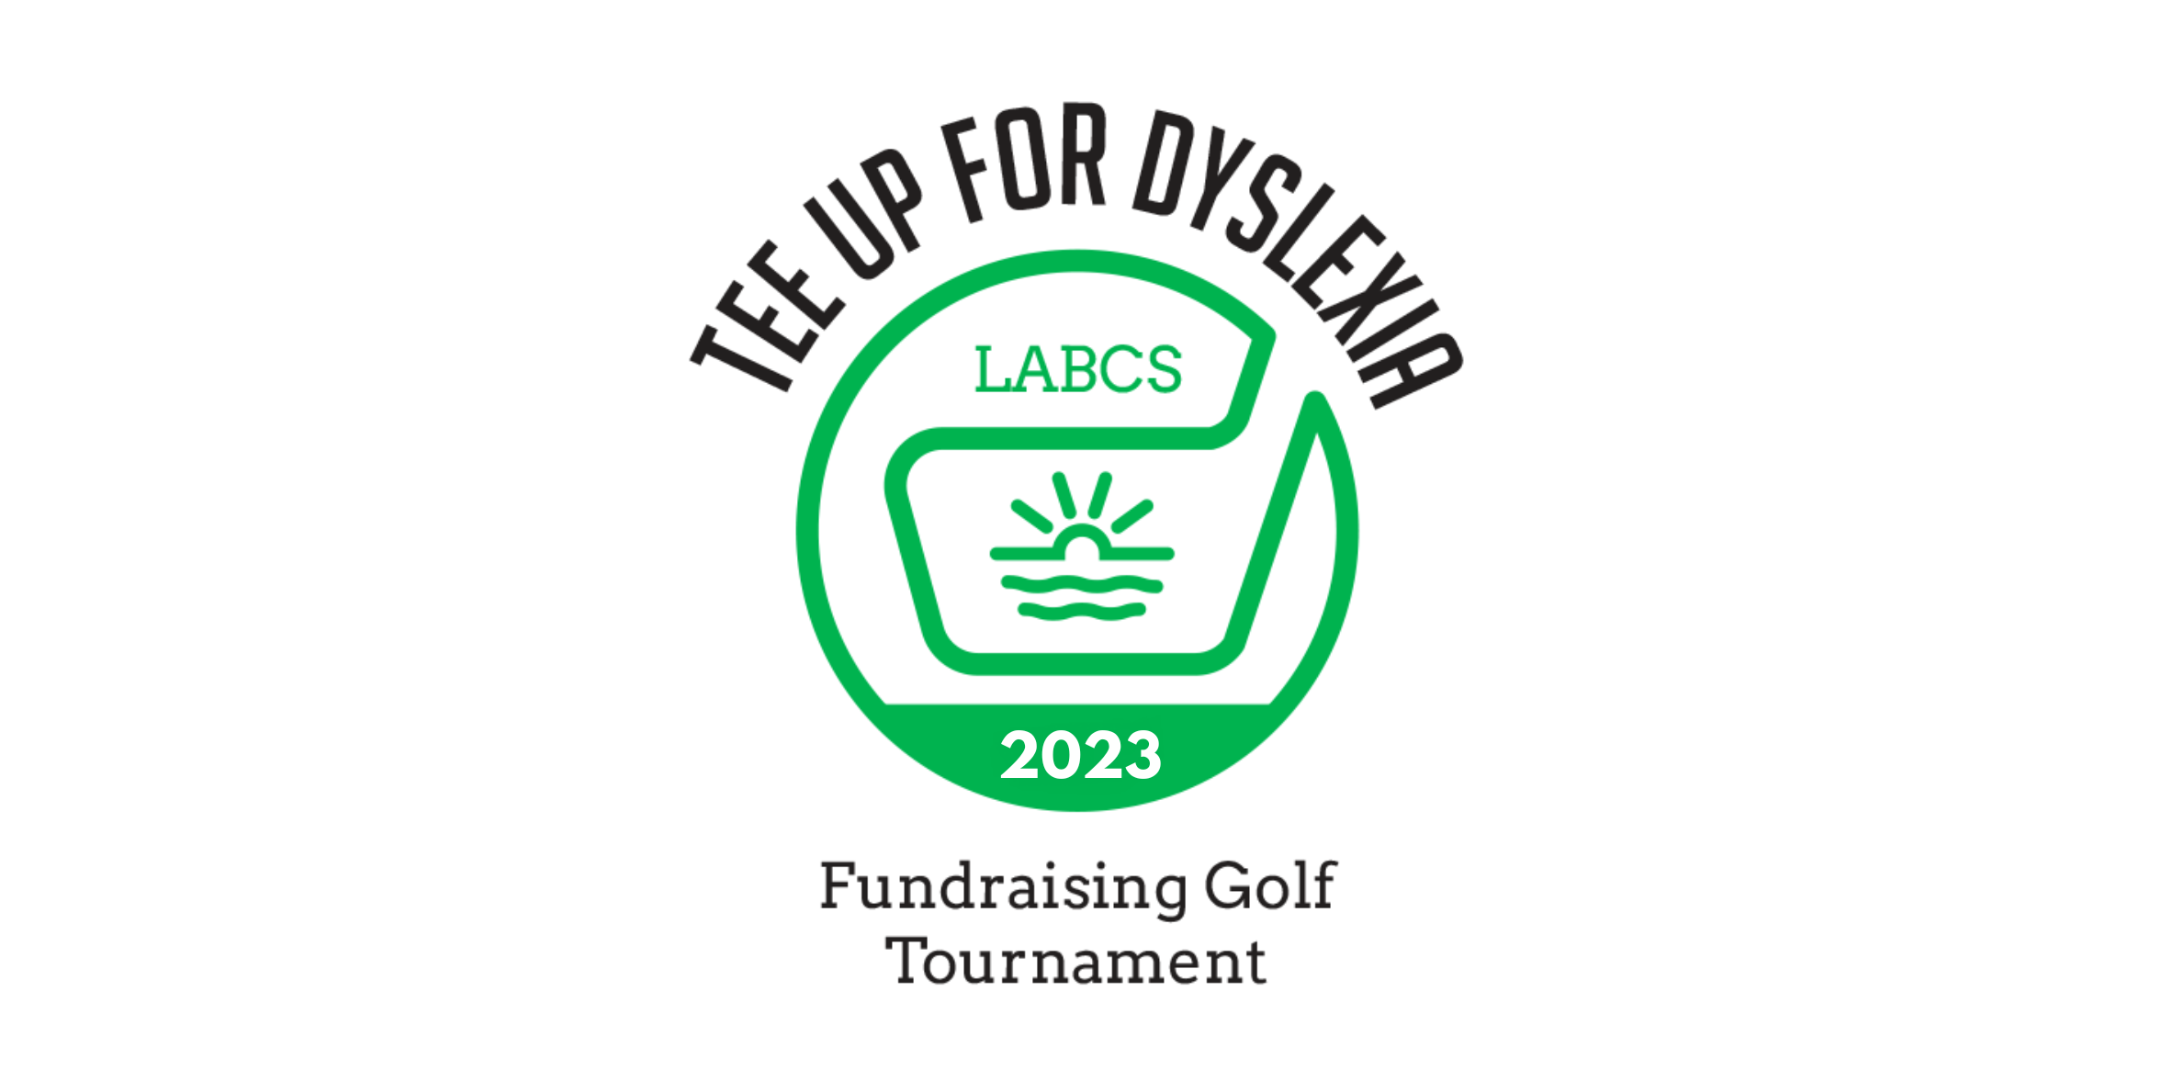 Tee Up for Dyslexia: 4th Annual Fundraising Golf Tournament